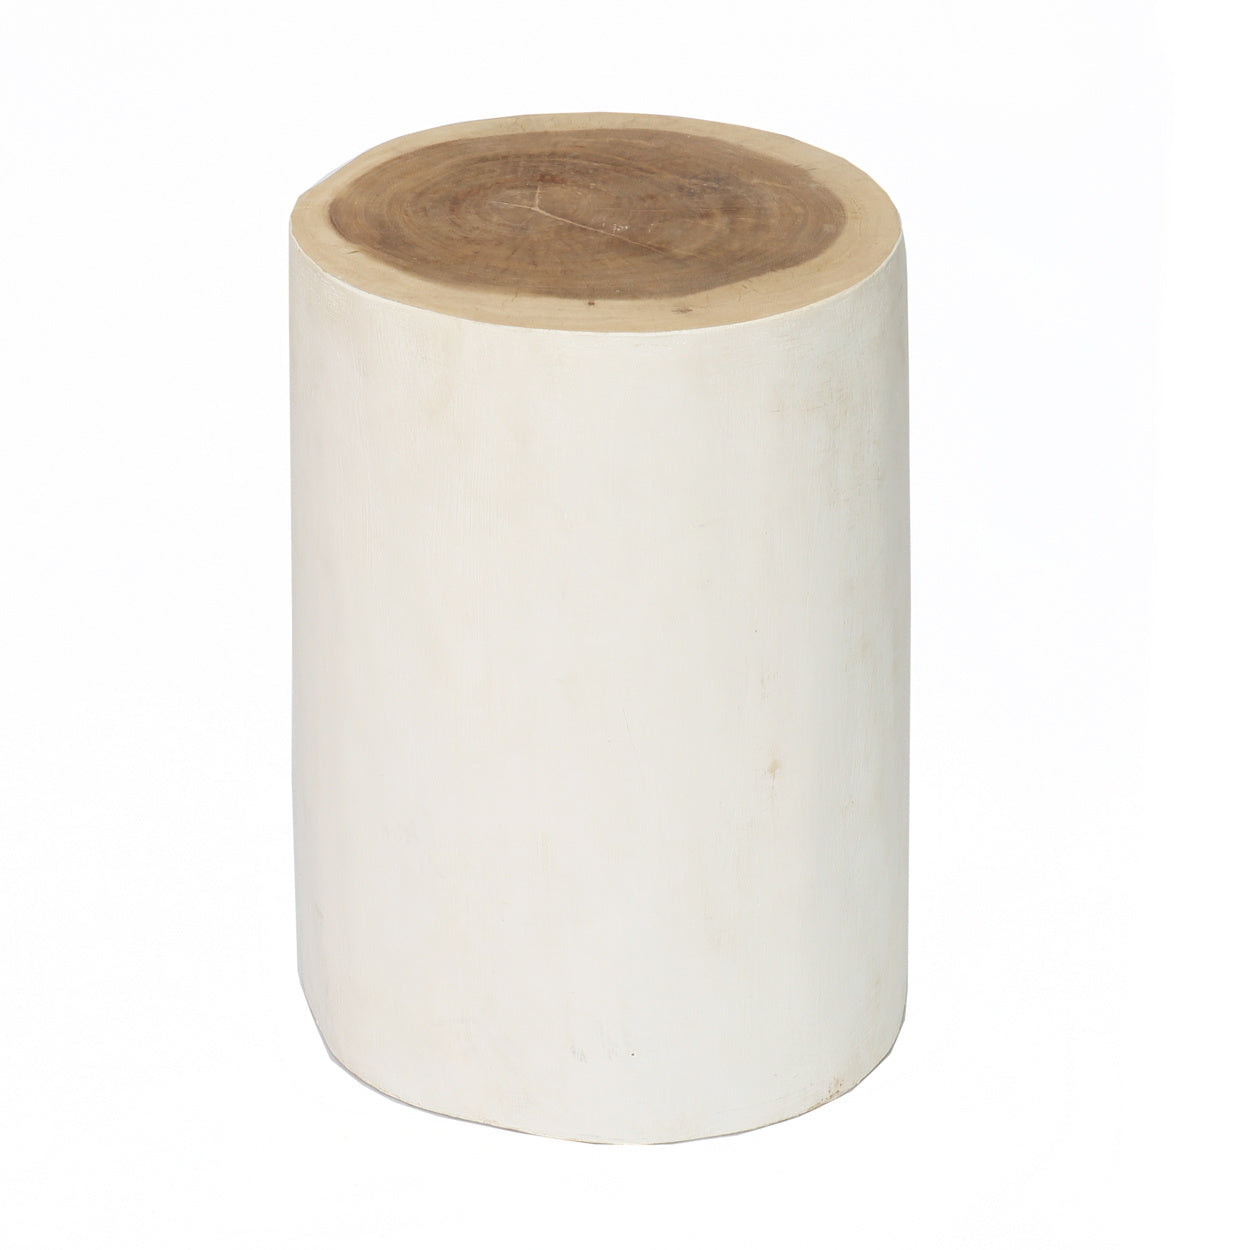 THE TRIBE Stool Natural White